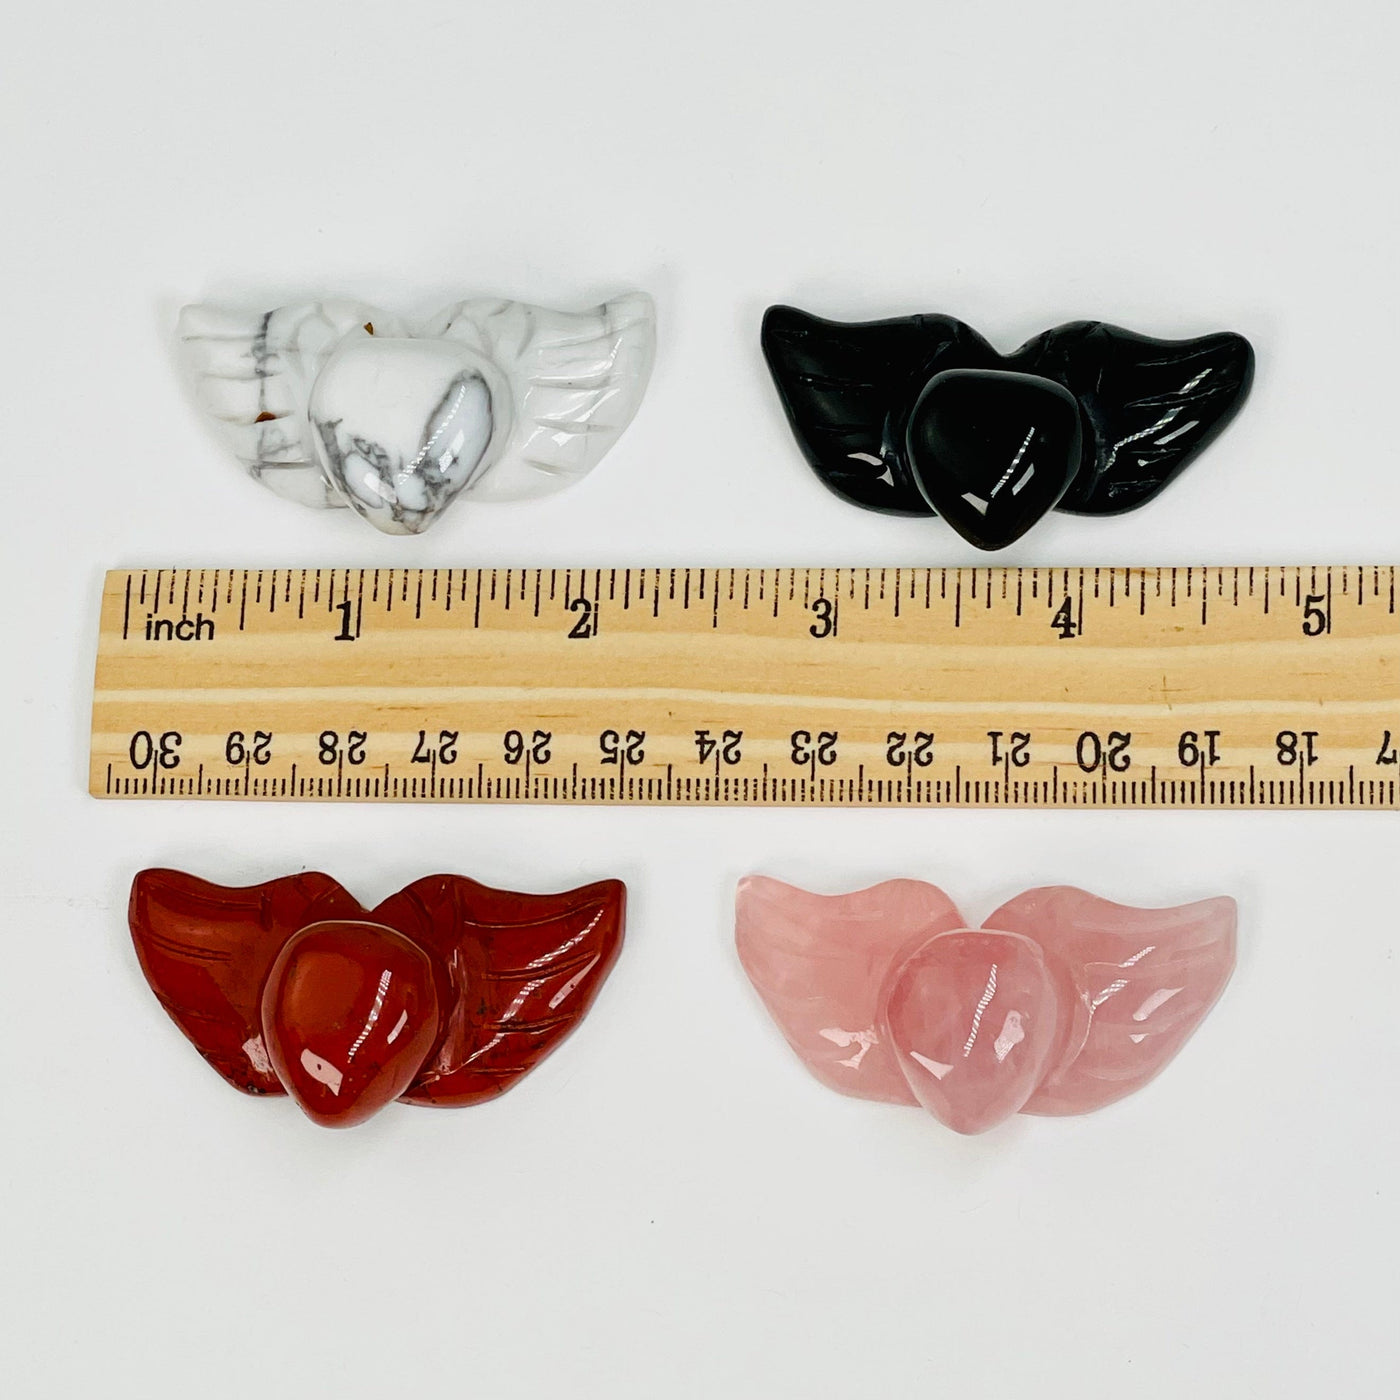 heat with wings carved gemstones next to a ruler for size reference 